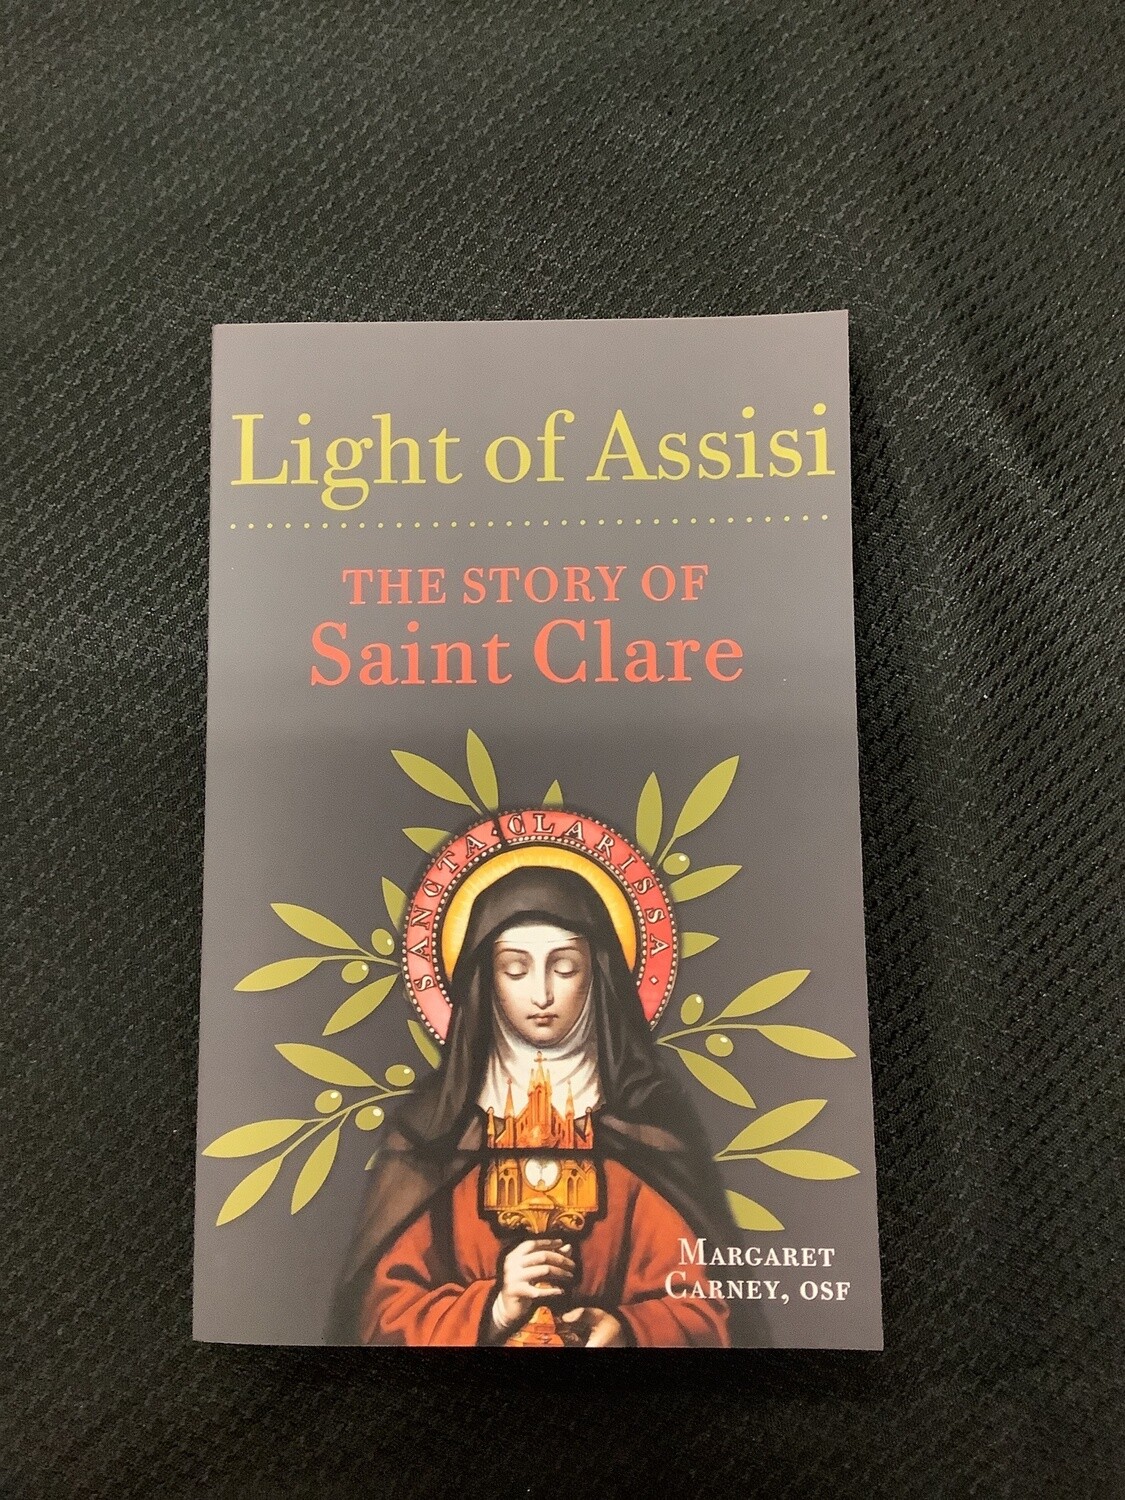 Light of Assisi The Story Of Saint Clare - Margaret Carney, OSF